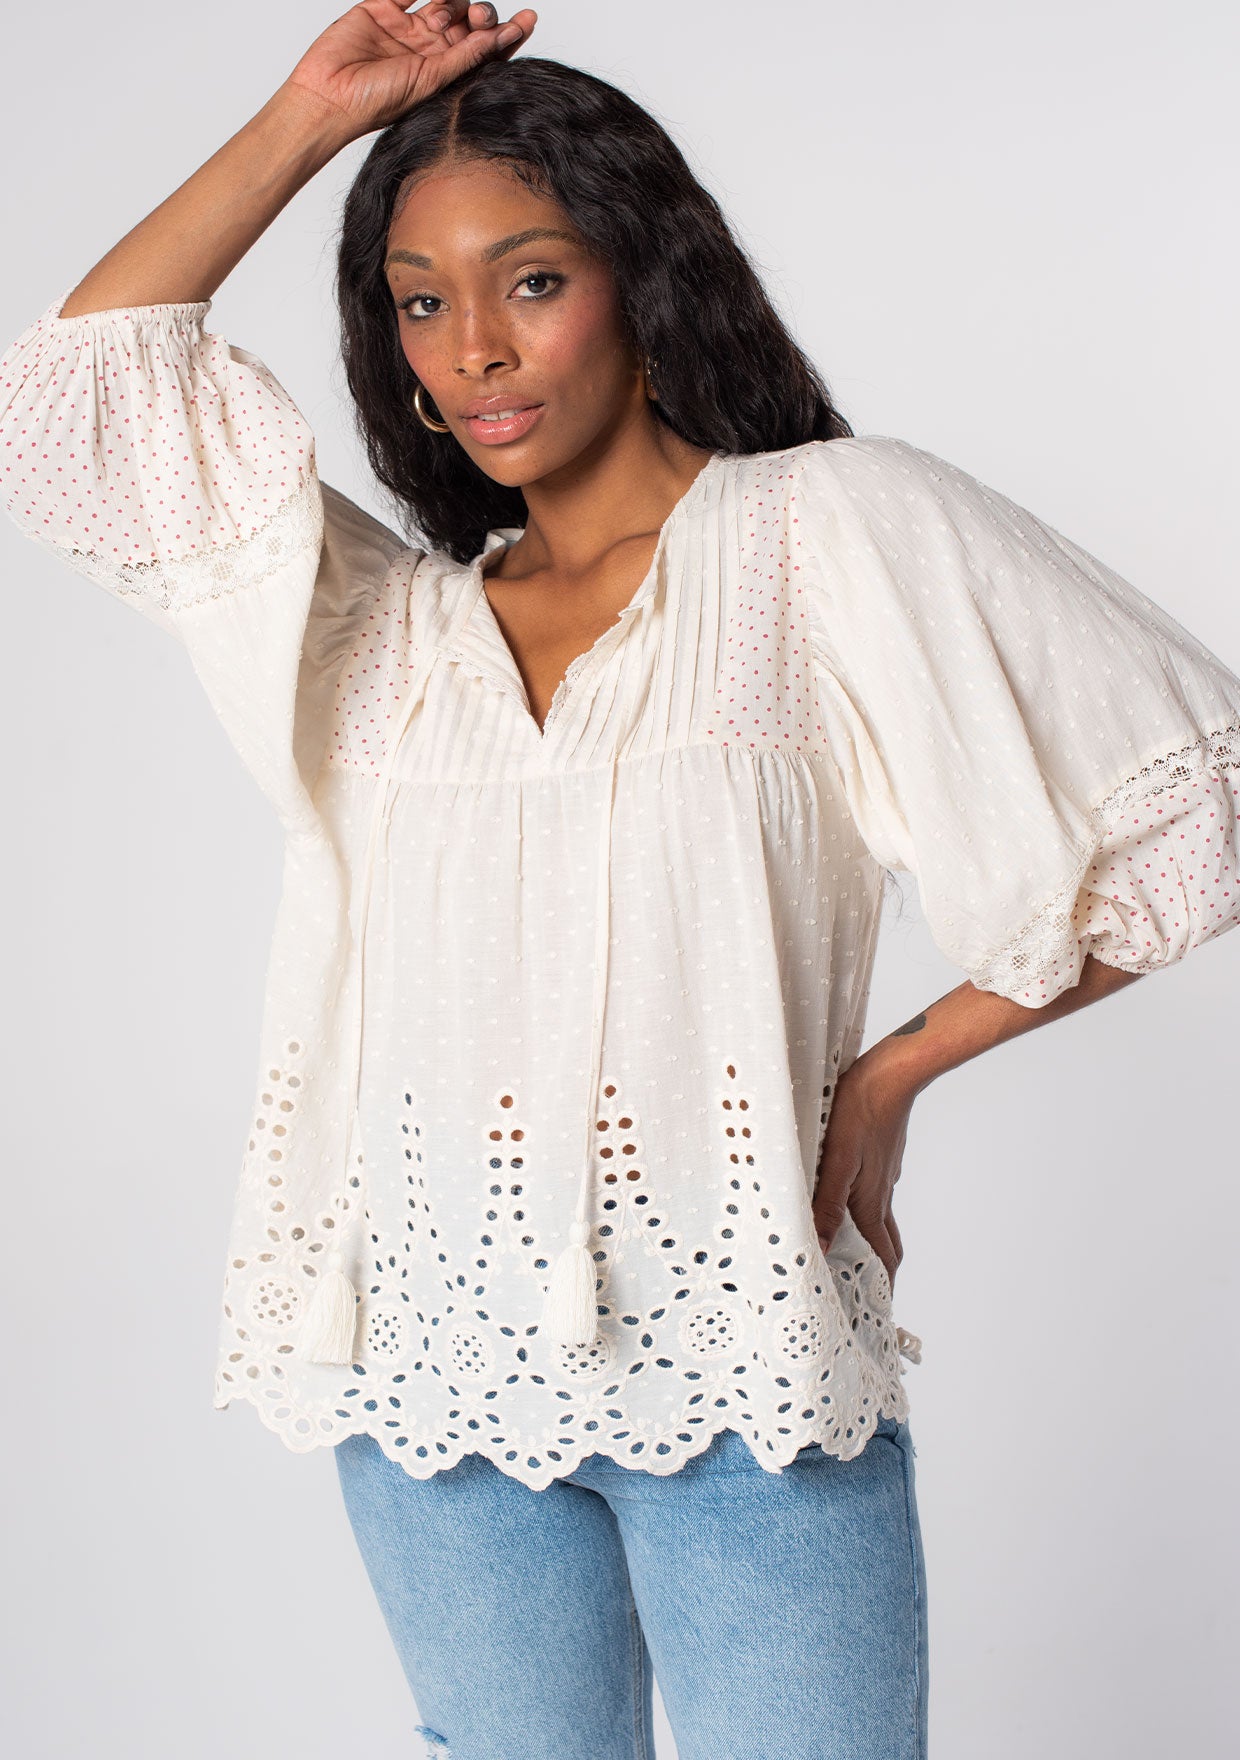 Boho Top - Cotton Embroidered Peasant Top